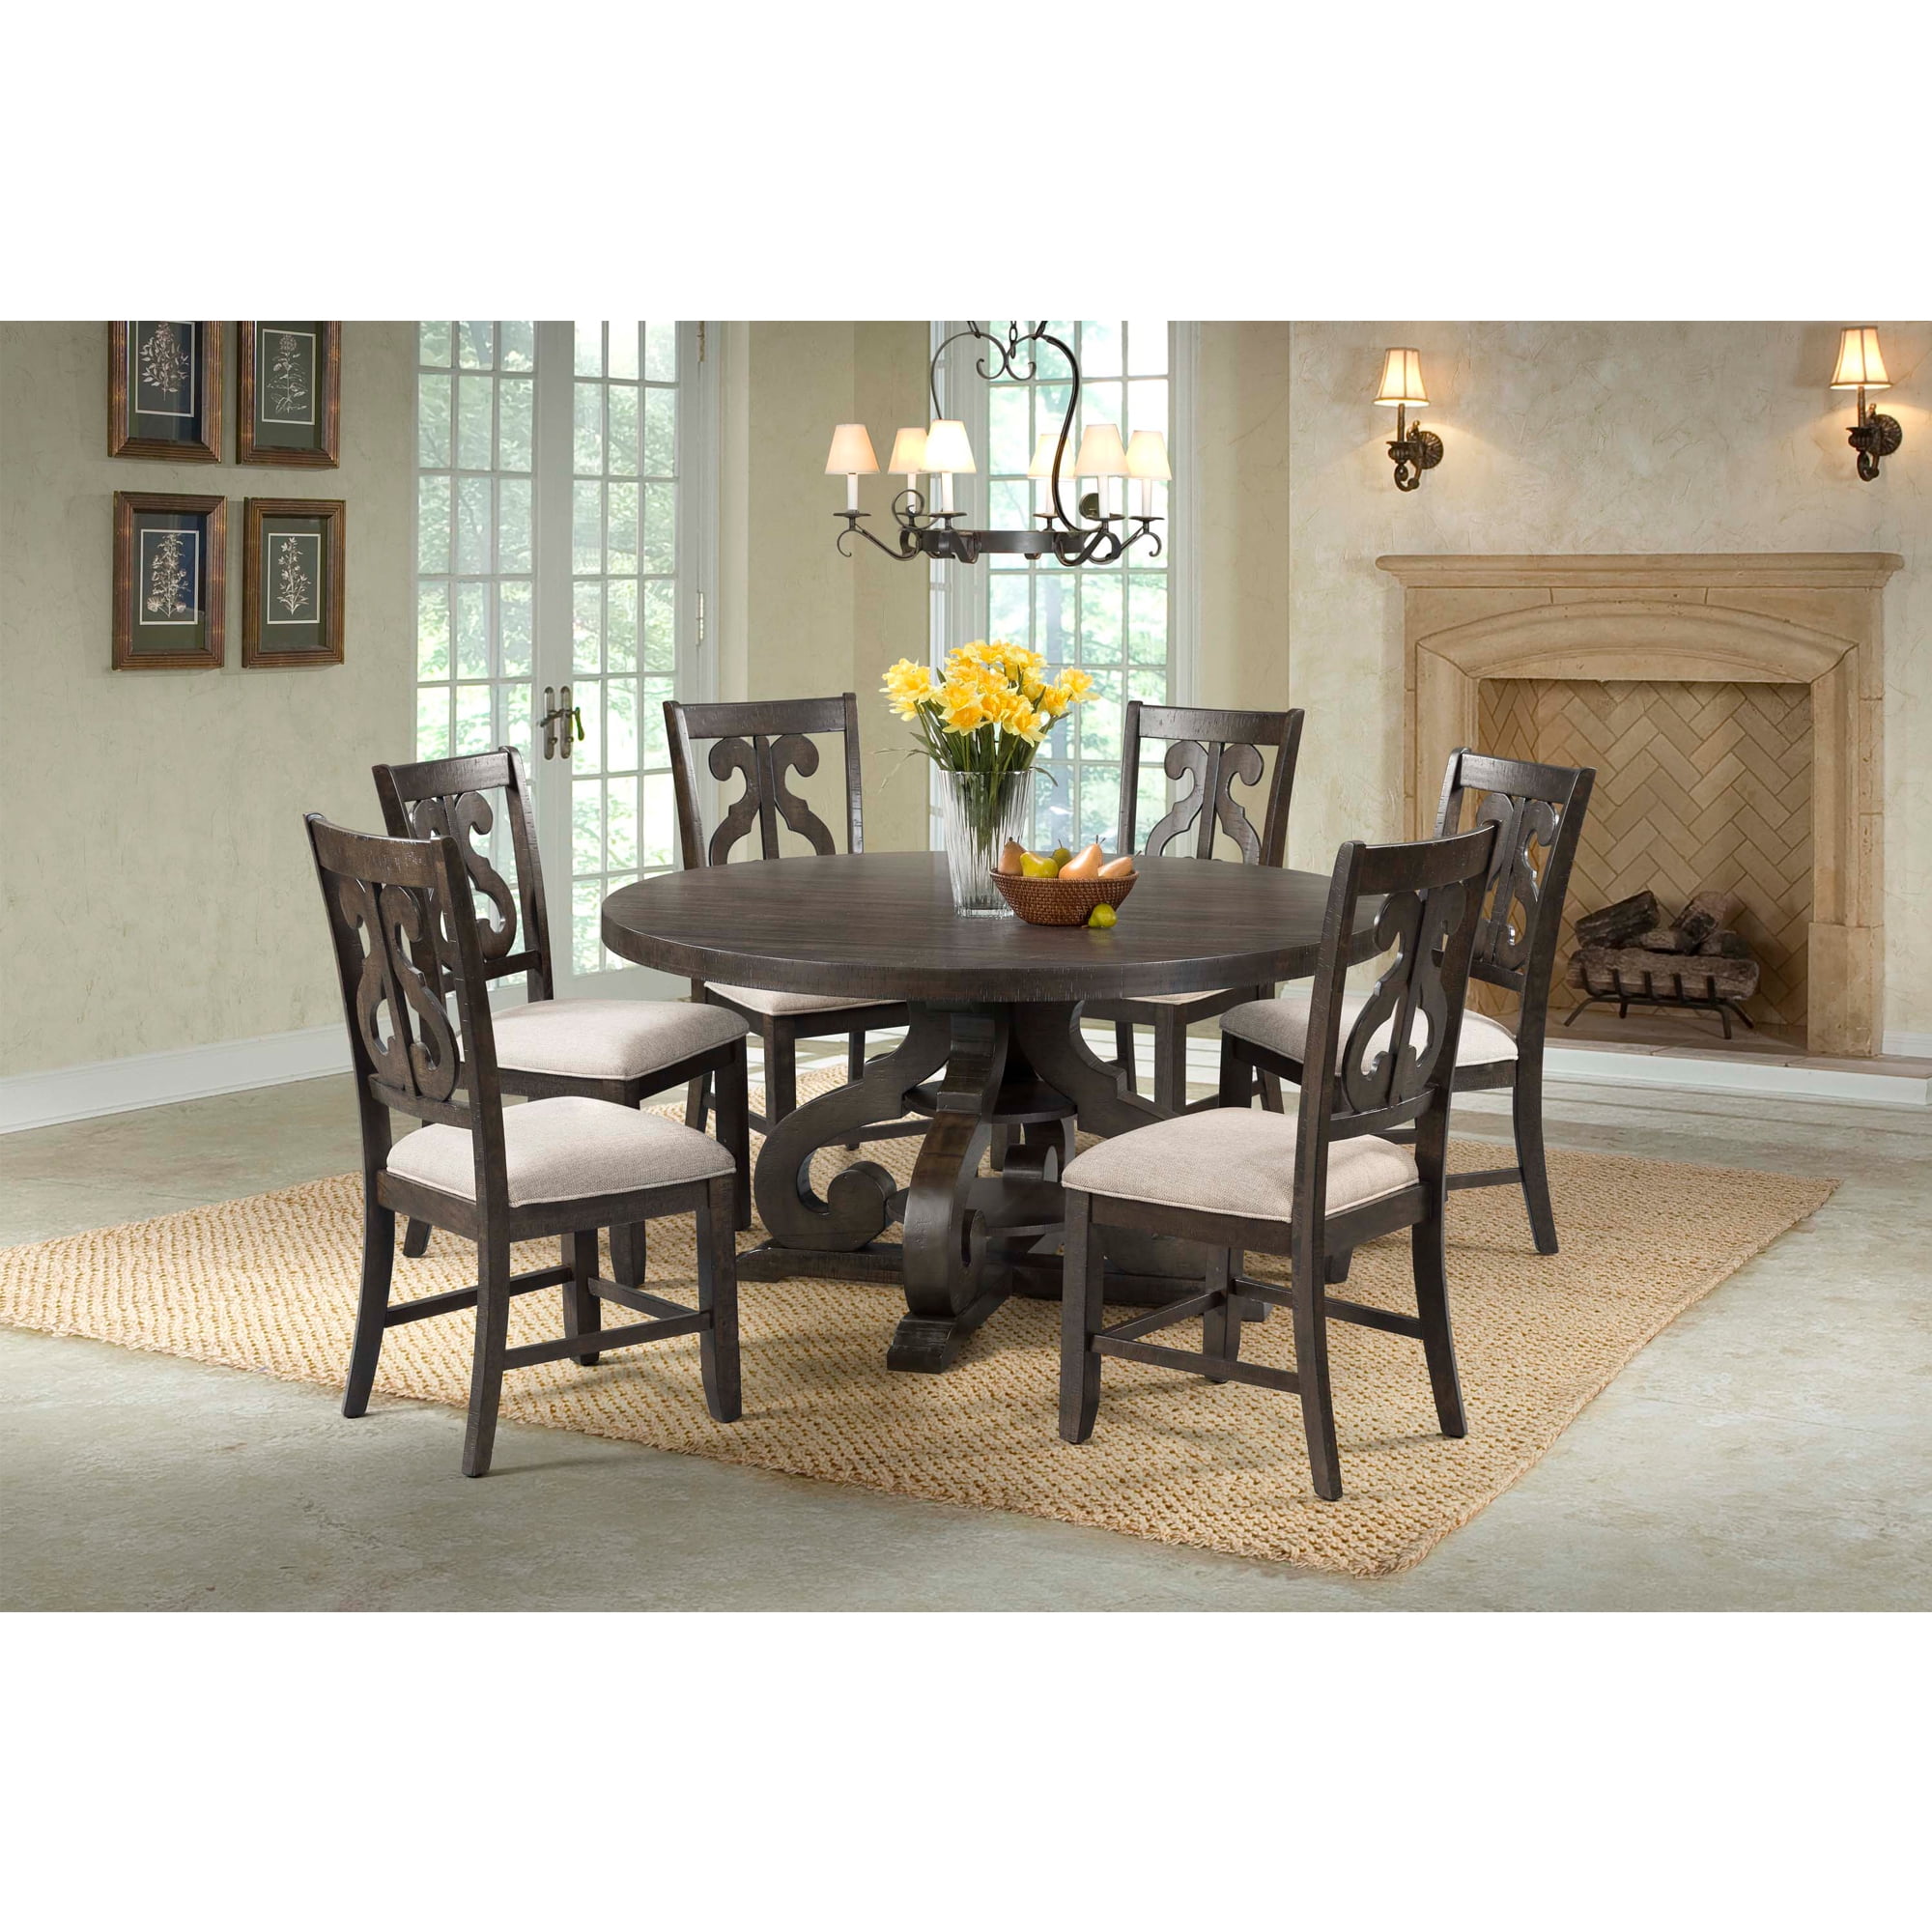 Picket House Furnishings Stanford Round 7PC Dining Set-Round Table & 6